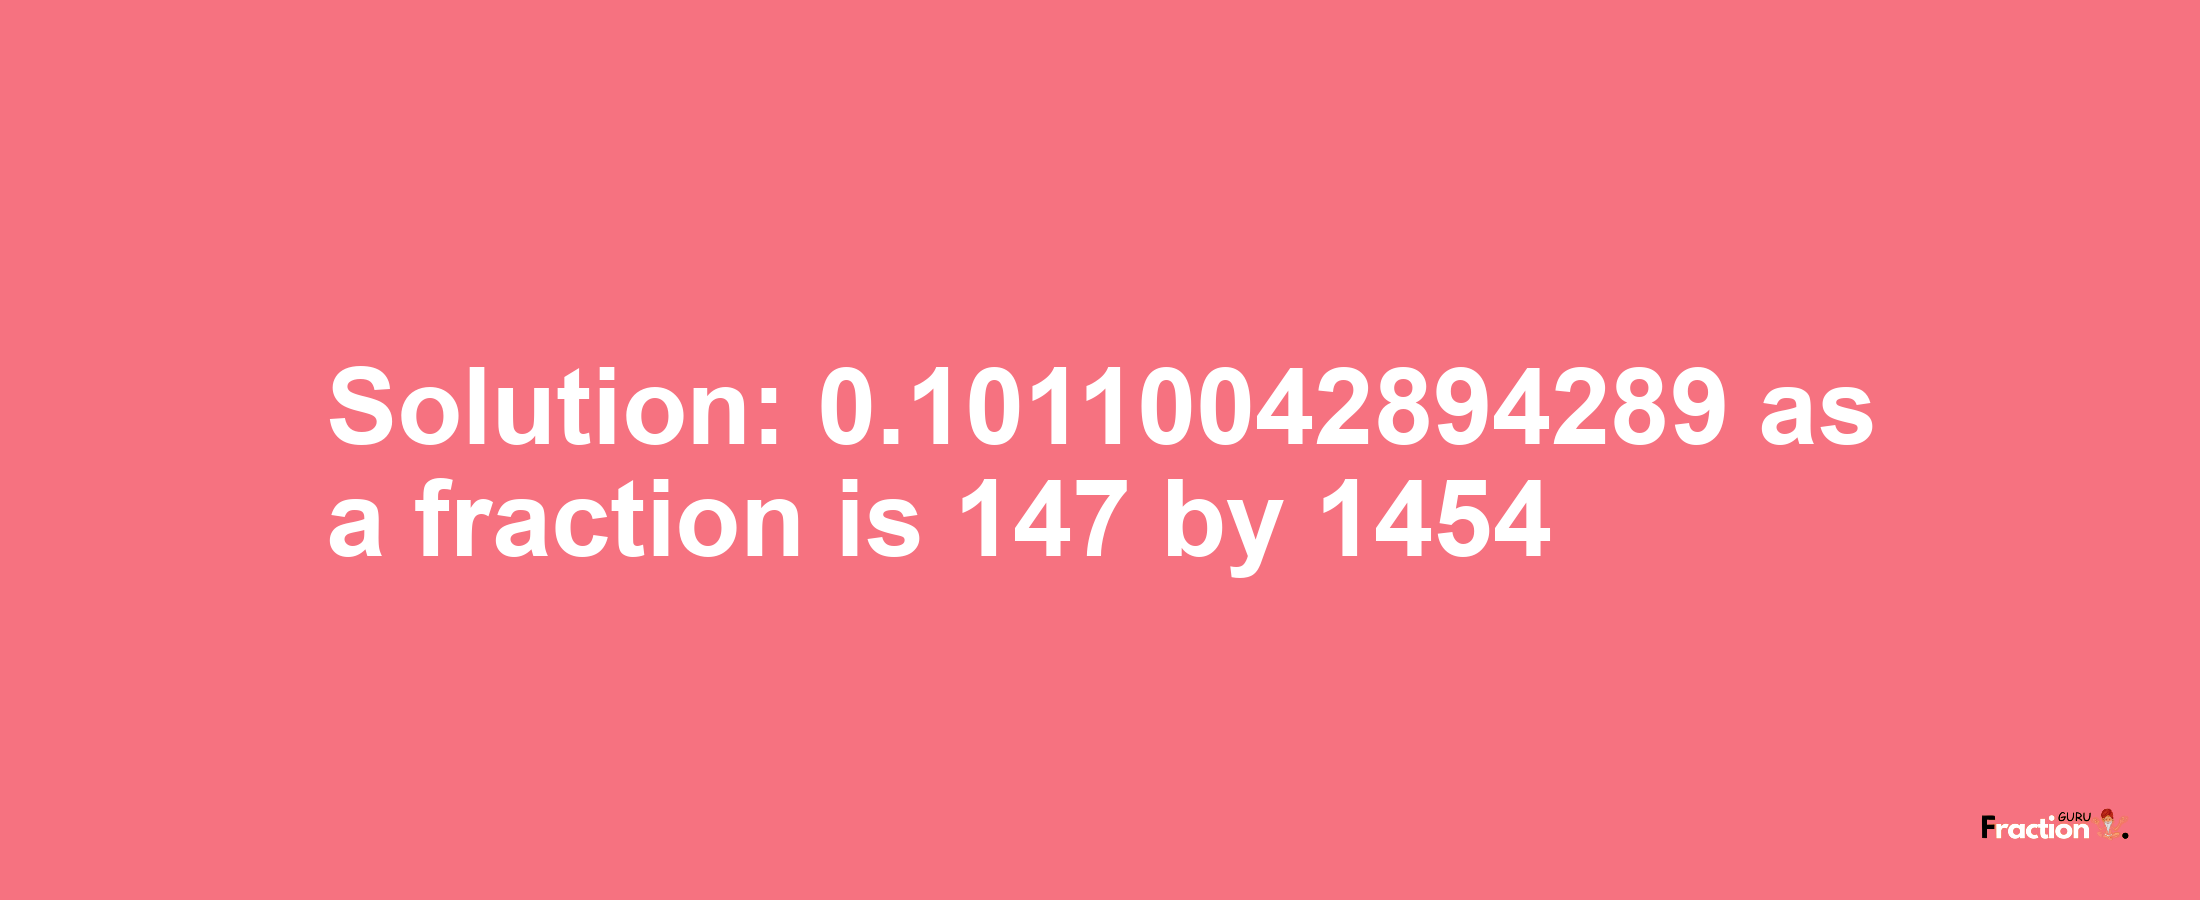 Solution:0.10110042894289 as a fraction is 147/1454